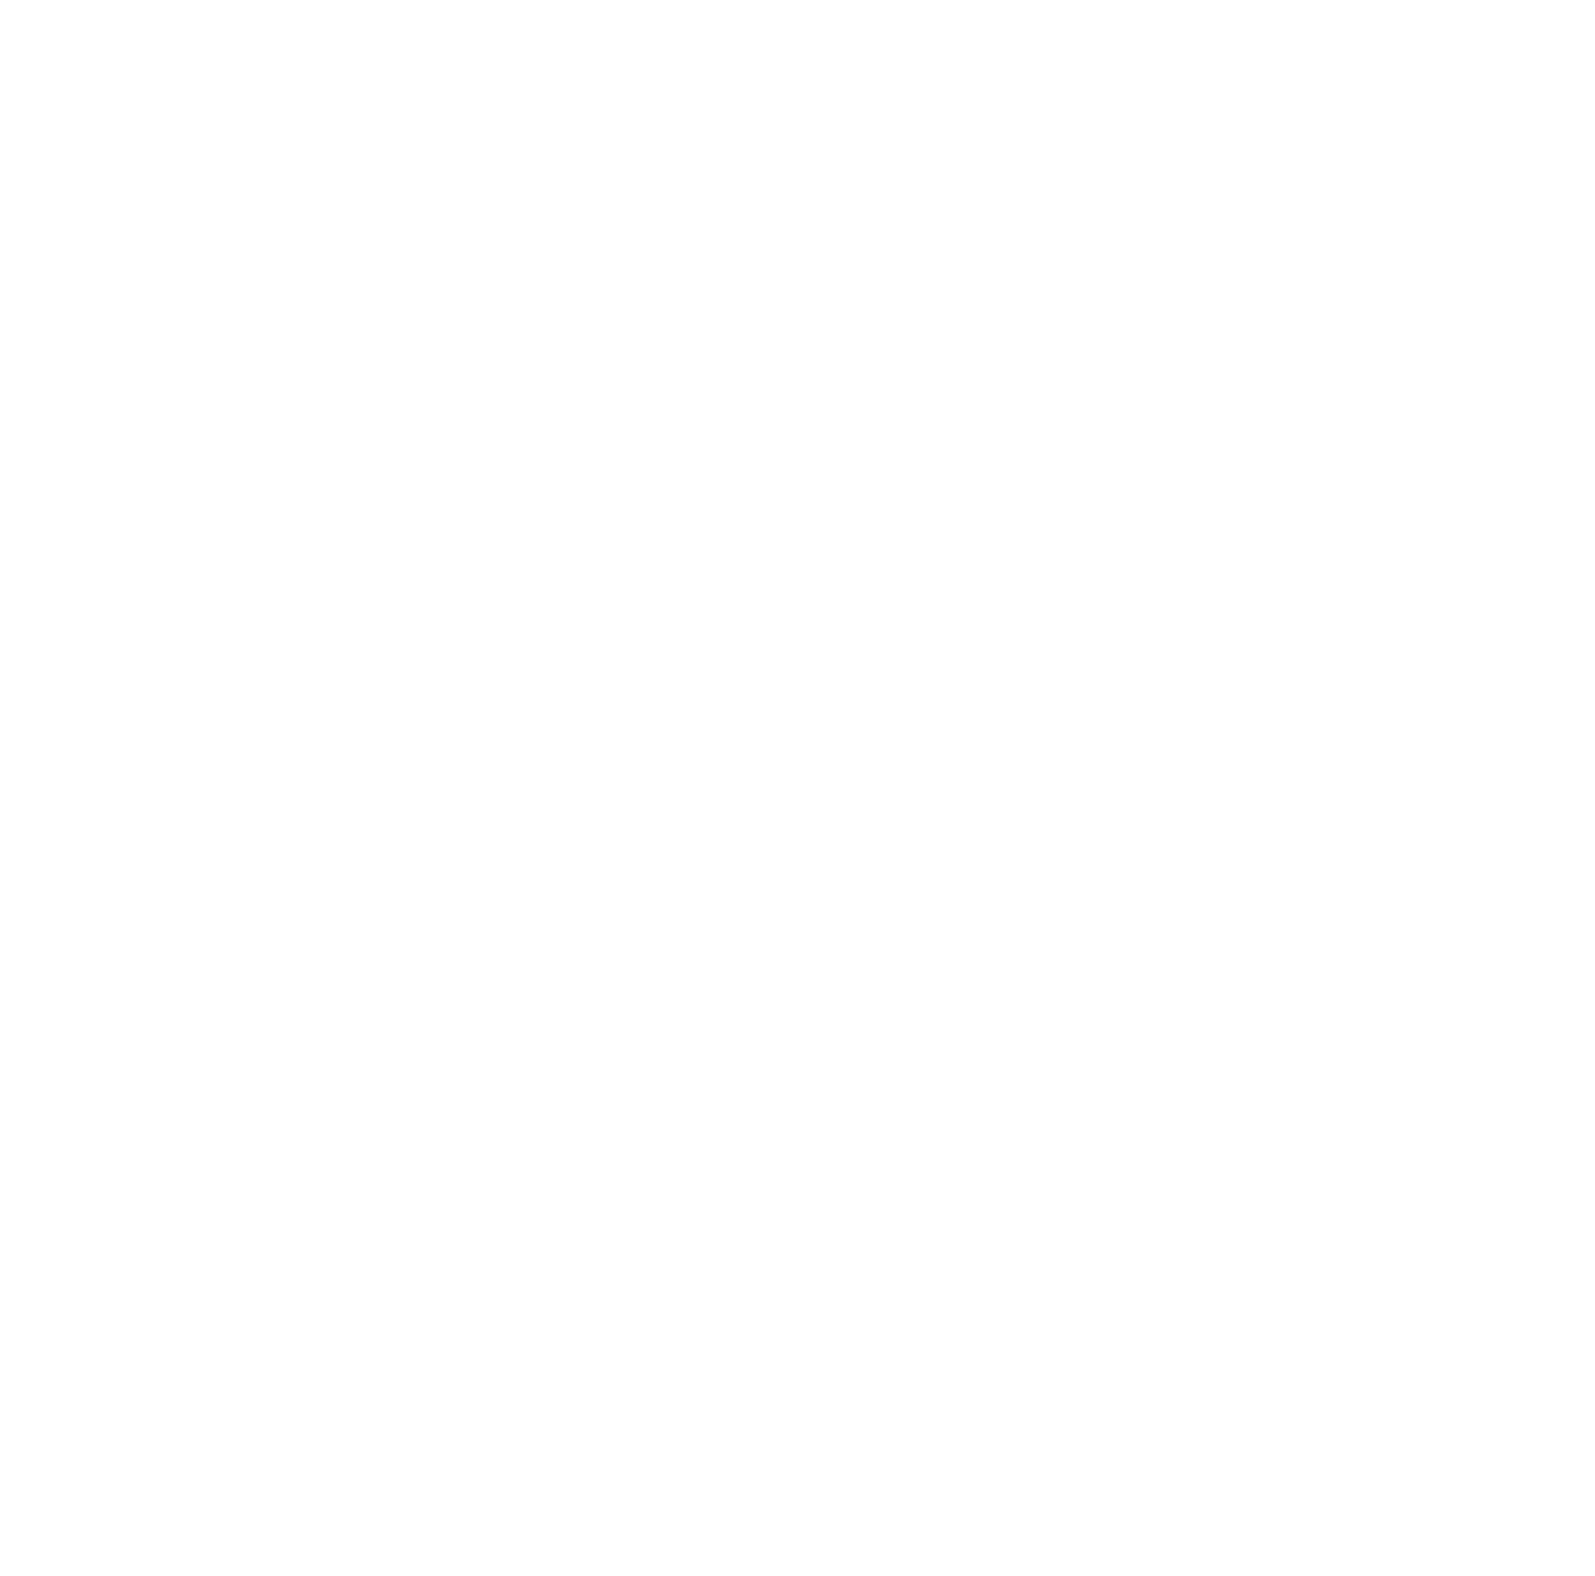 Auckland Airport logo for dark backgrounds (transparent PNG)